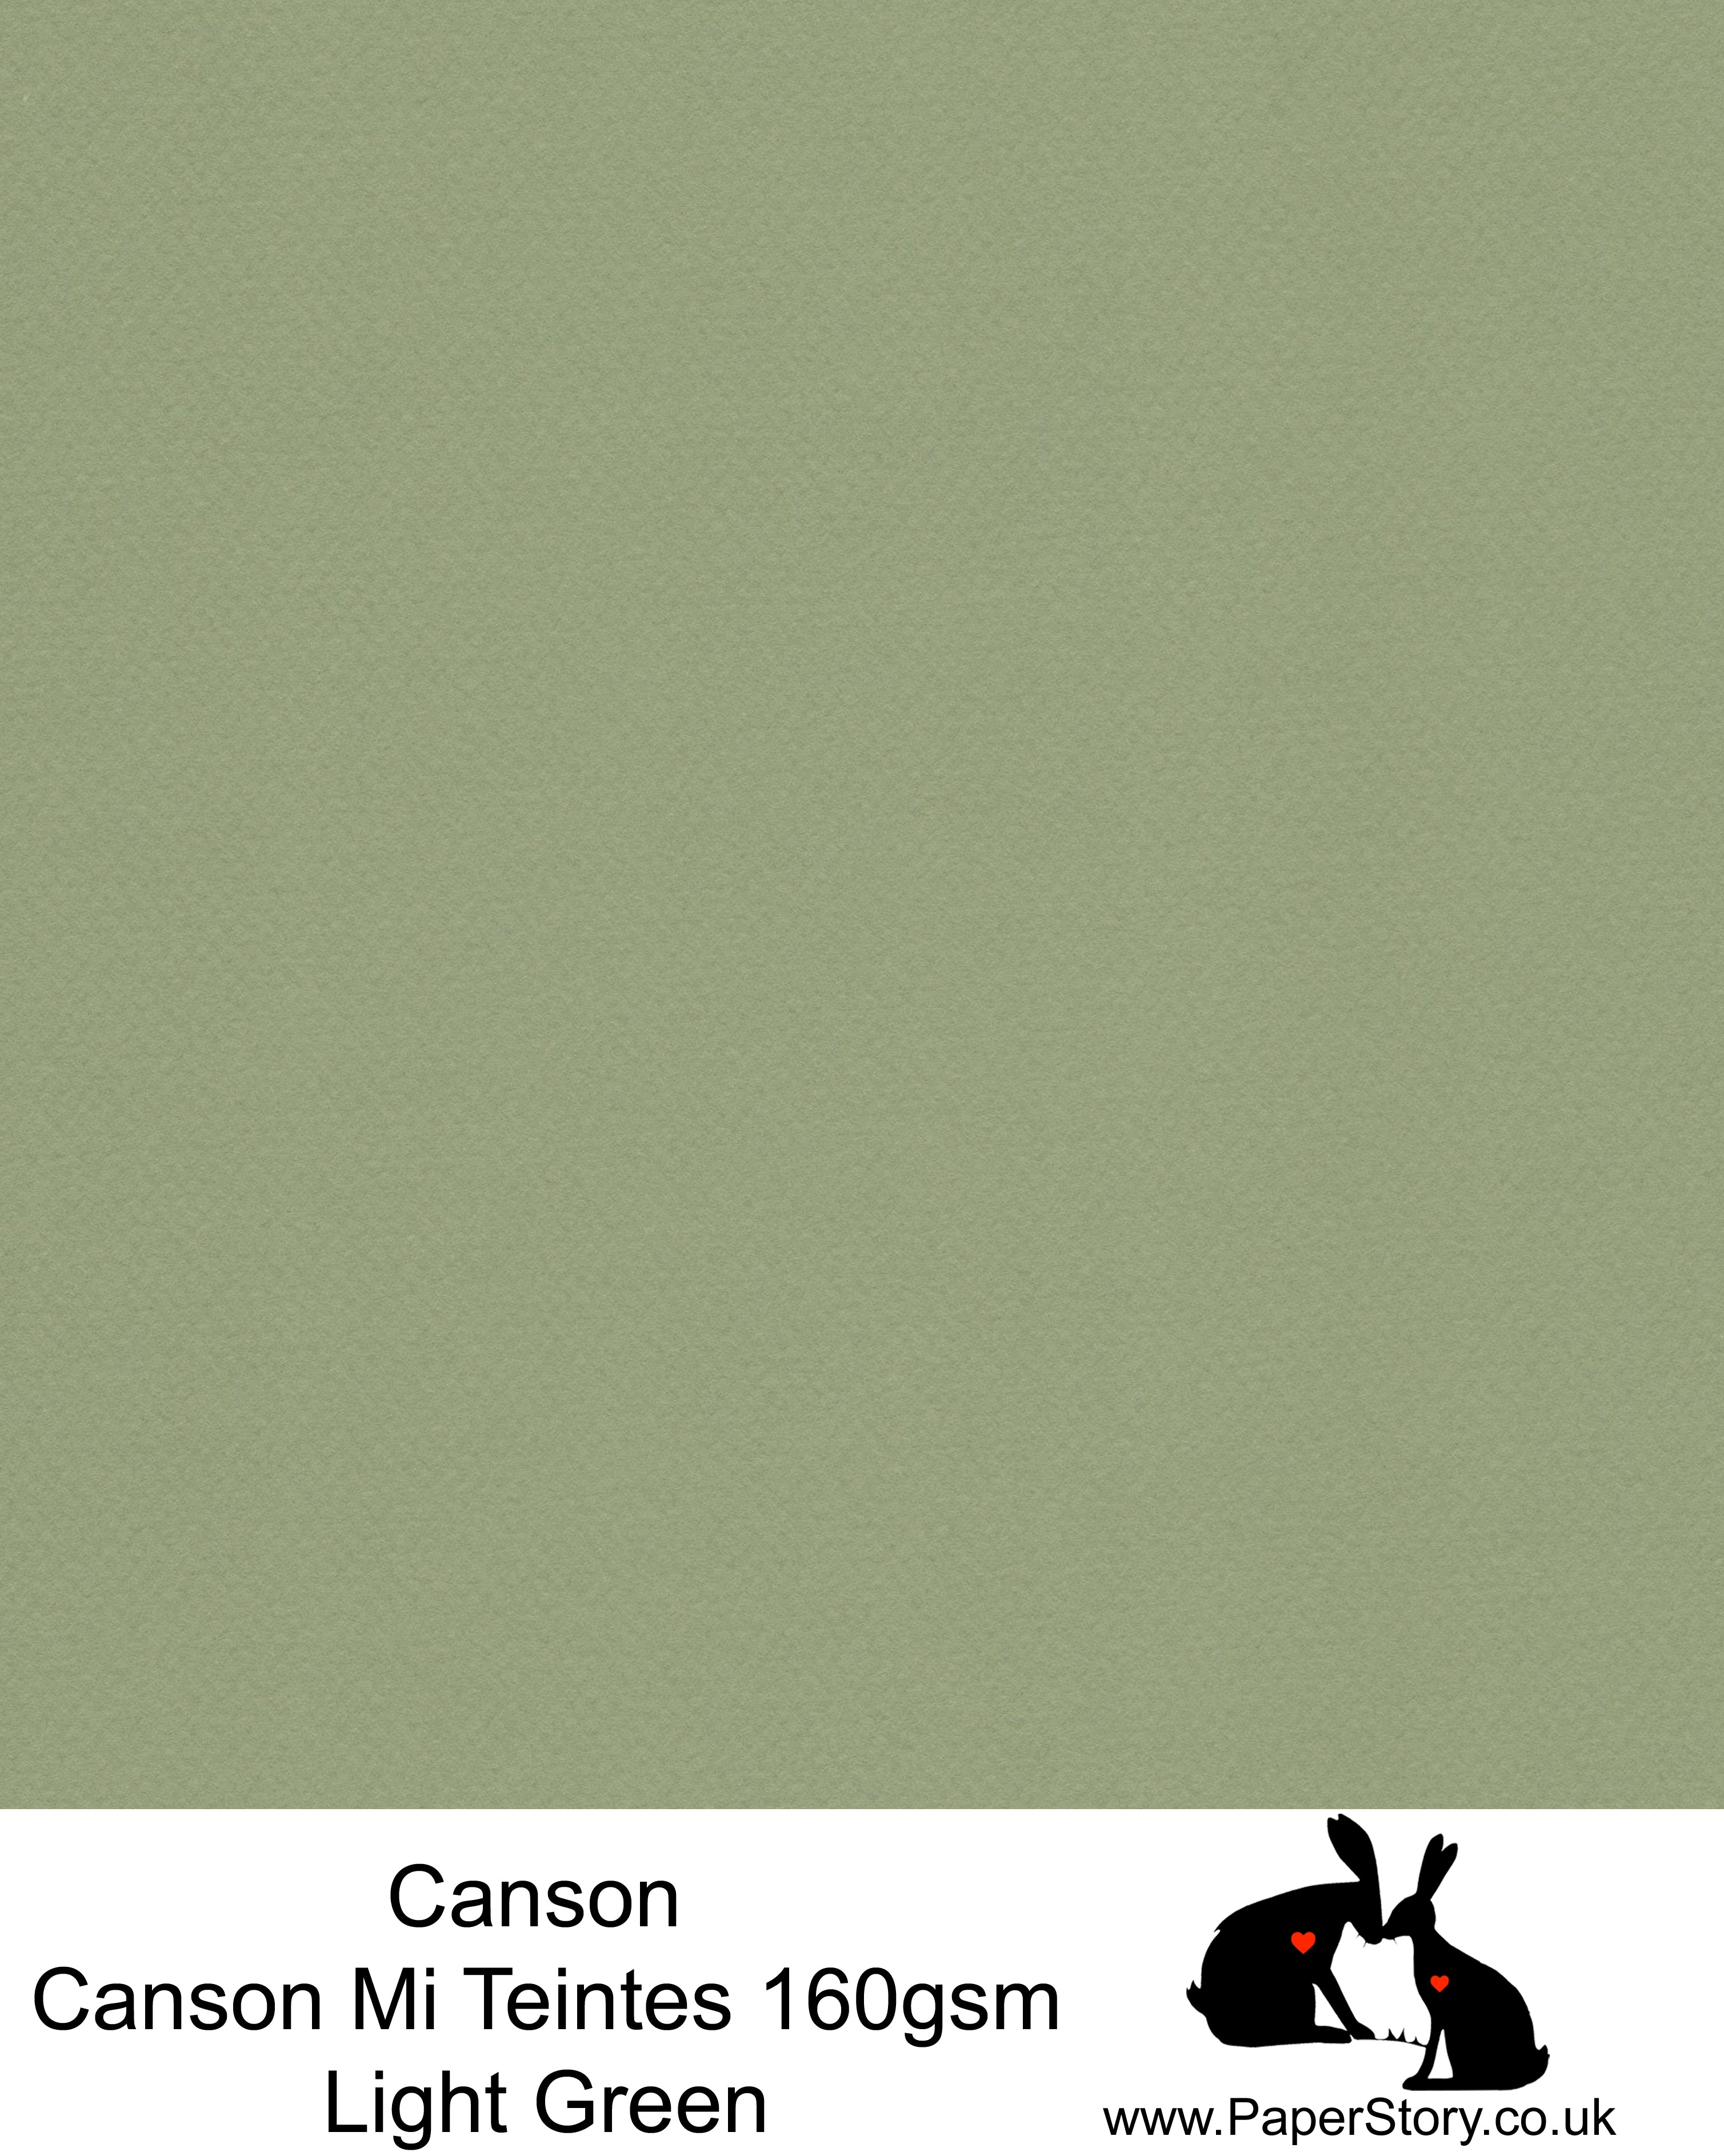 Canson Mi Teintes acid free, Champagne, soft light green hammered texture honeycomb surface paper 160 gsm. This is a popular and classic paper for all artists especially well respected for Pastel  and Papercutting made famous by Paper Panda. This paper has a honeycombed finish one side and fine grain the other. An authentic art paper, acid free with a  very high 50% cotton content. Canson Mi-Teintes complies with the ISO 9706 standard on permanence, a guarantee of excellent conservation 